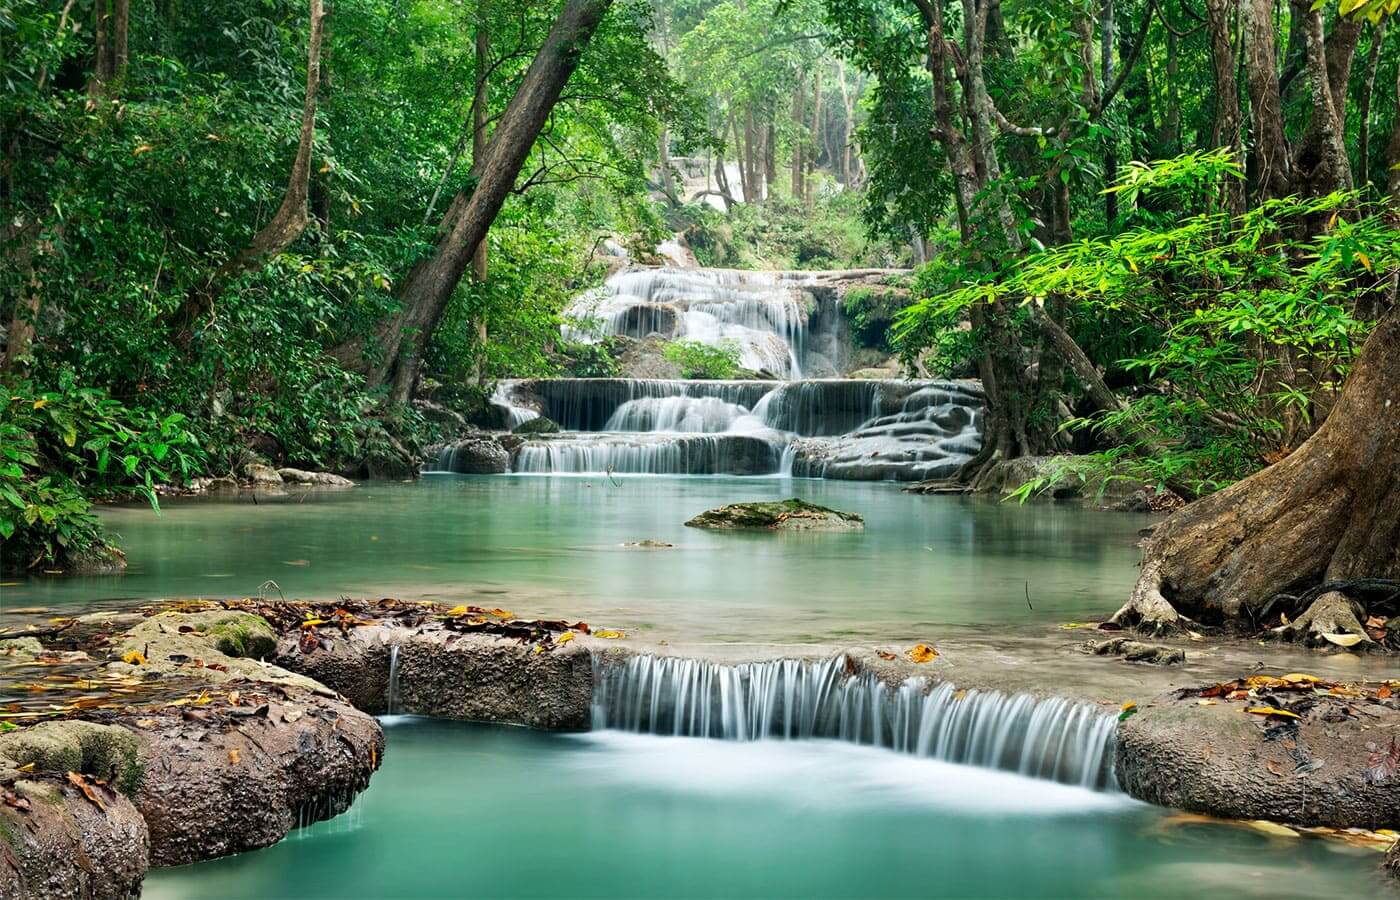 A series of waterfalls in a deep tropical forest